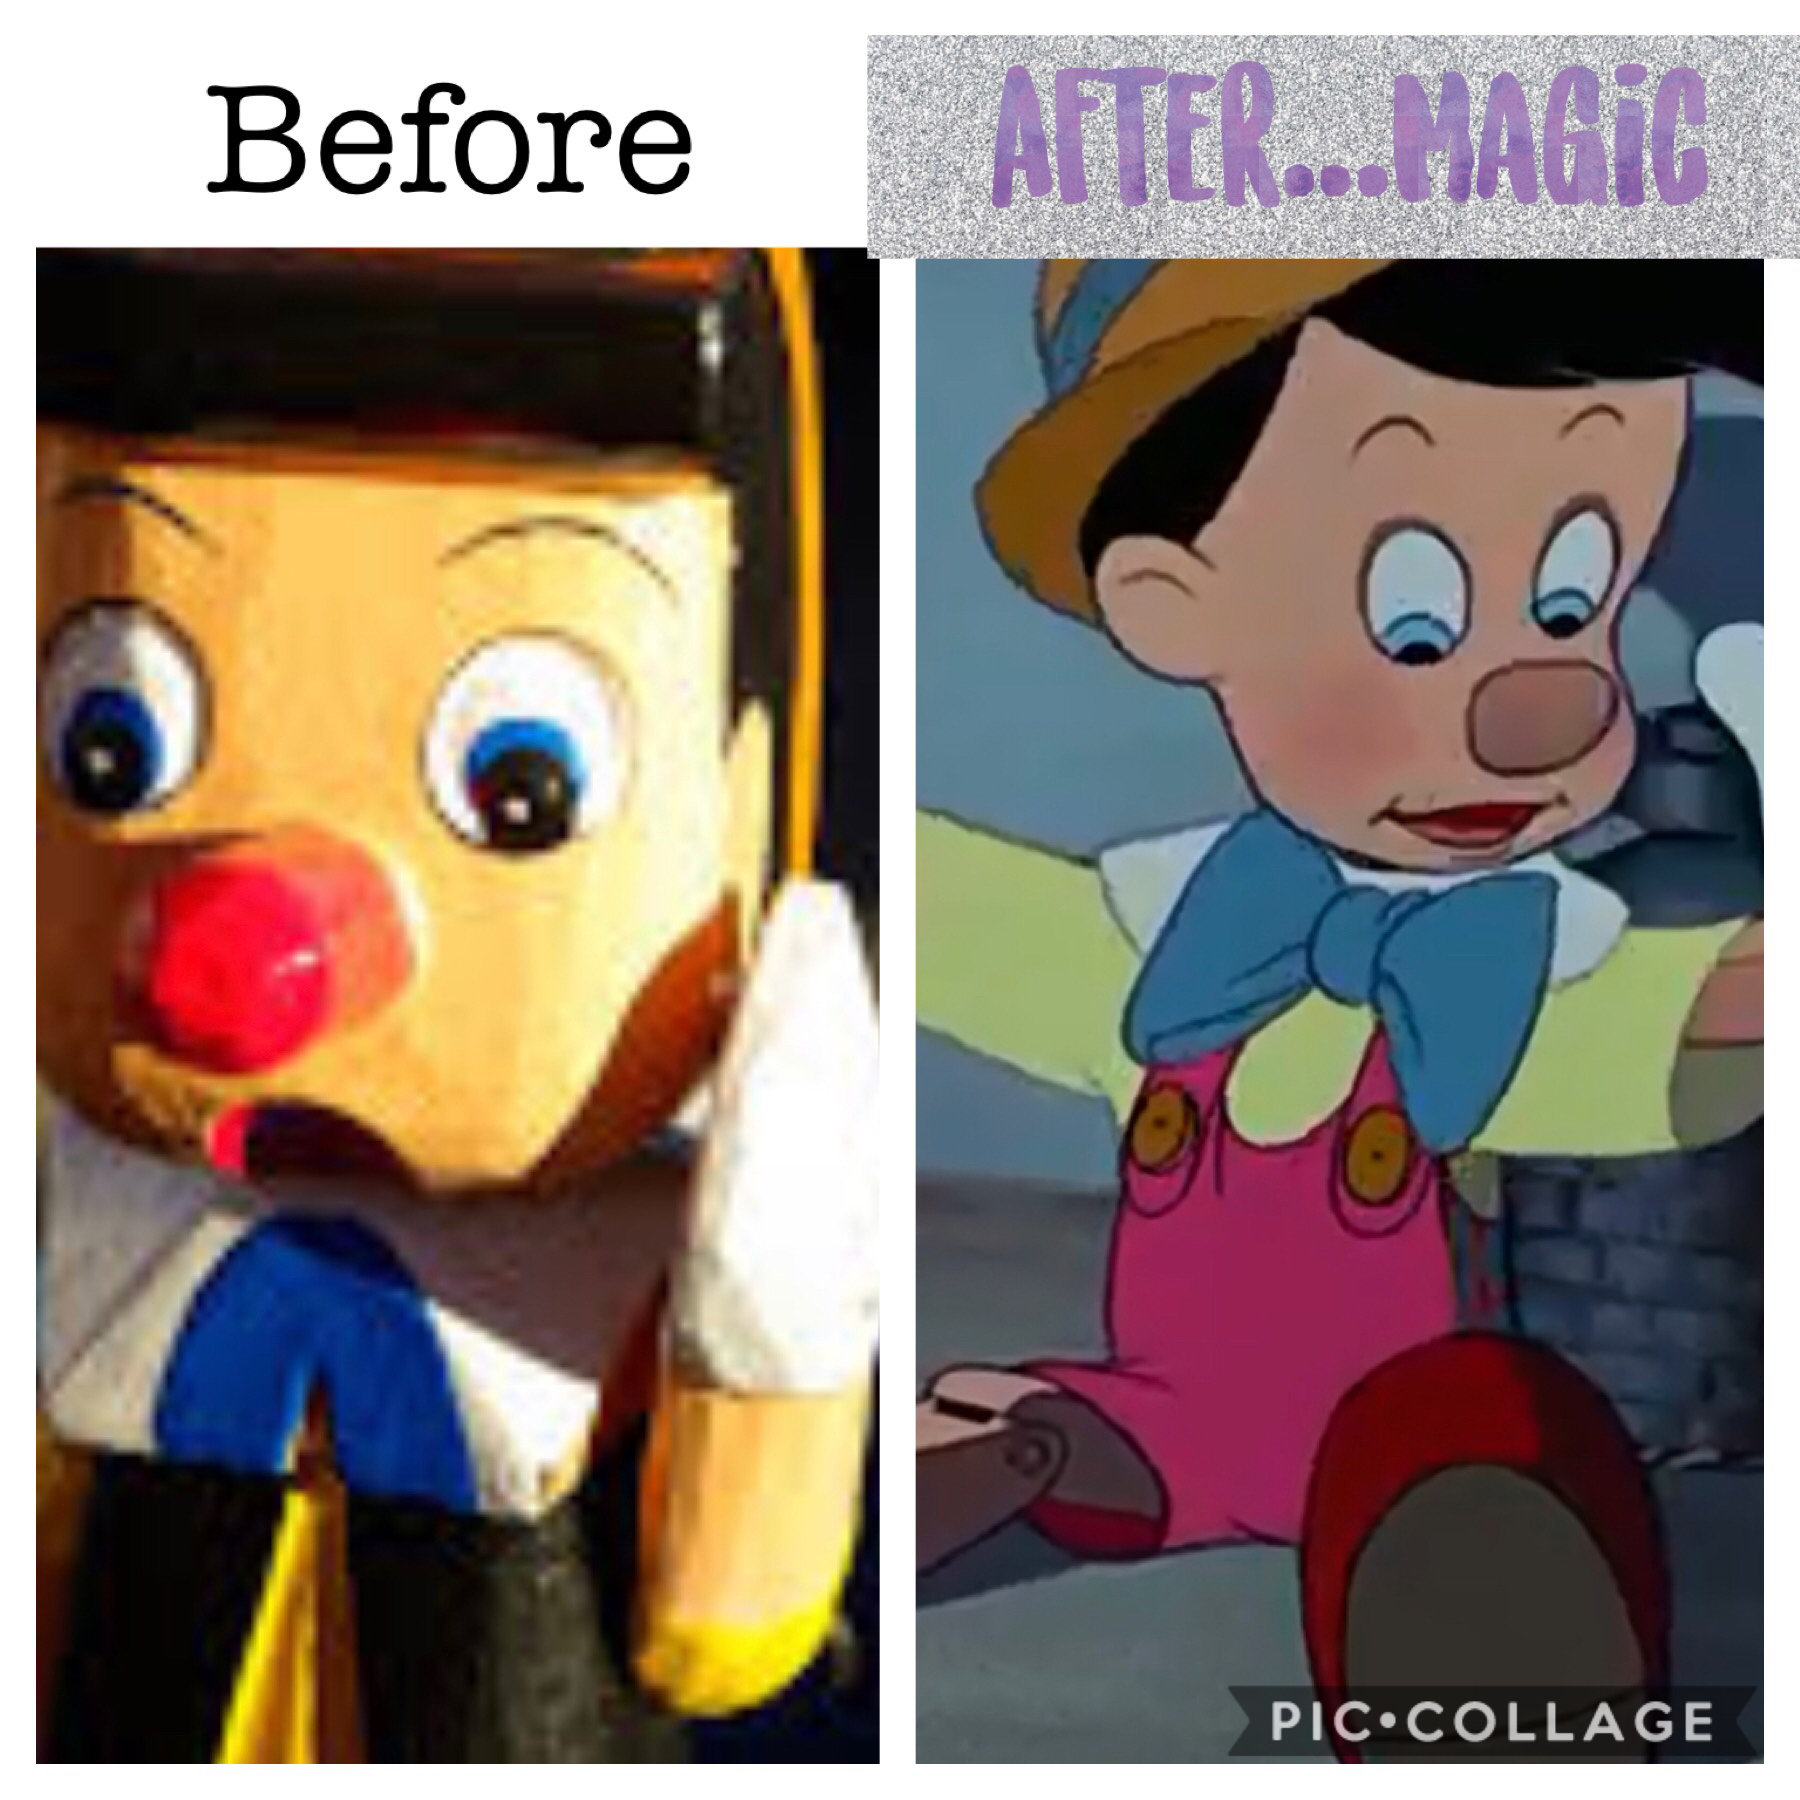 Pinocchio 
Before and After
(The first picture was too CREEPY)